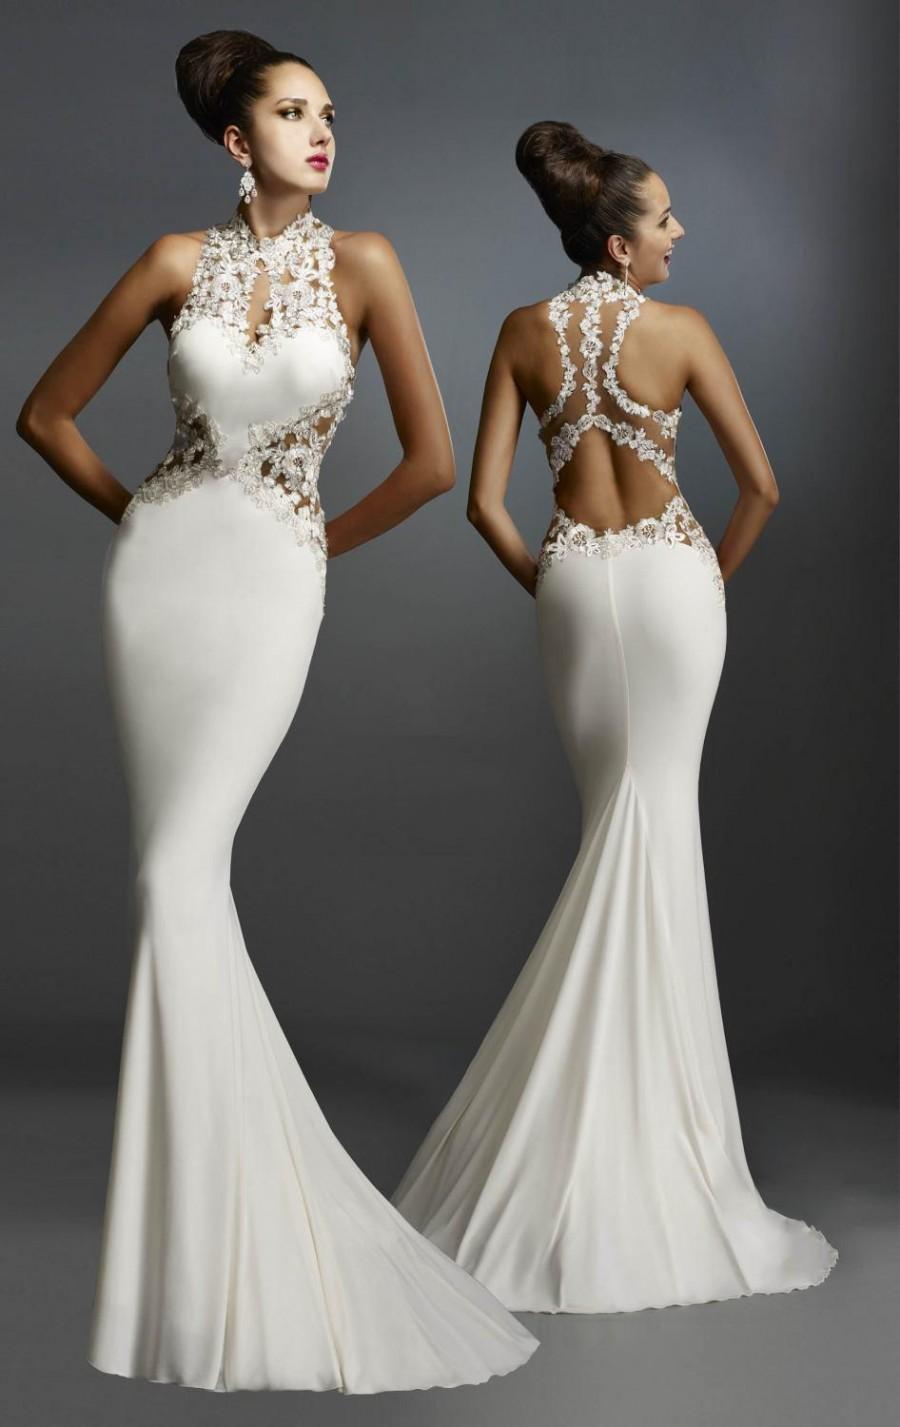 Hochzeit - Janique 2015 Sexy White Evening Dresses Mermaid Embroidered Sheer High Neck Lace Backless Sweep See Through Custom Prom Dresses Gowns Party, $108.05 